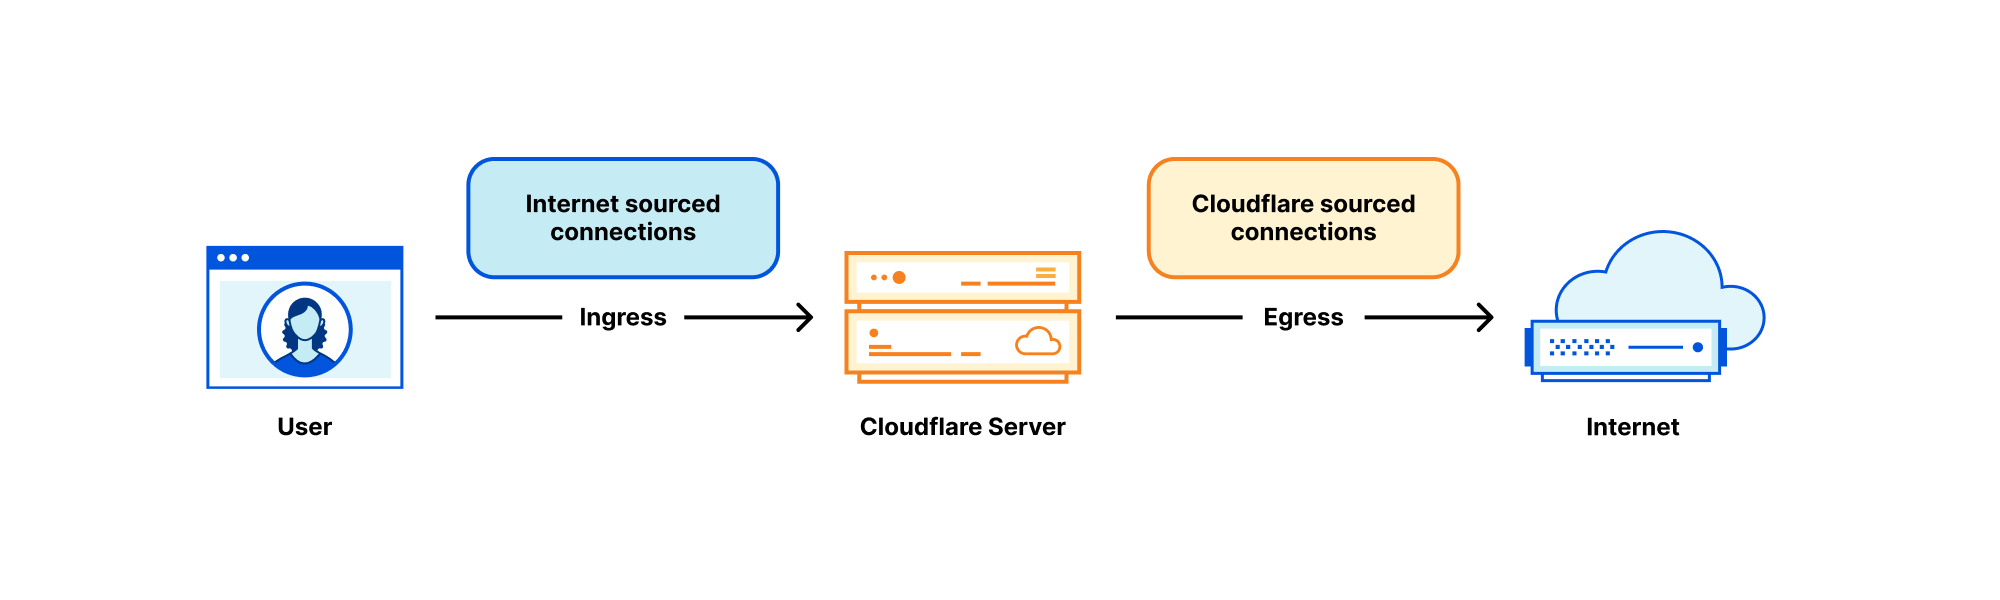 Cloudflare servers don't own IPs anymore – so how do they connect to the Internet?